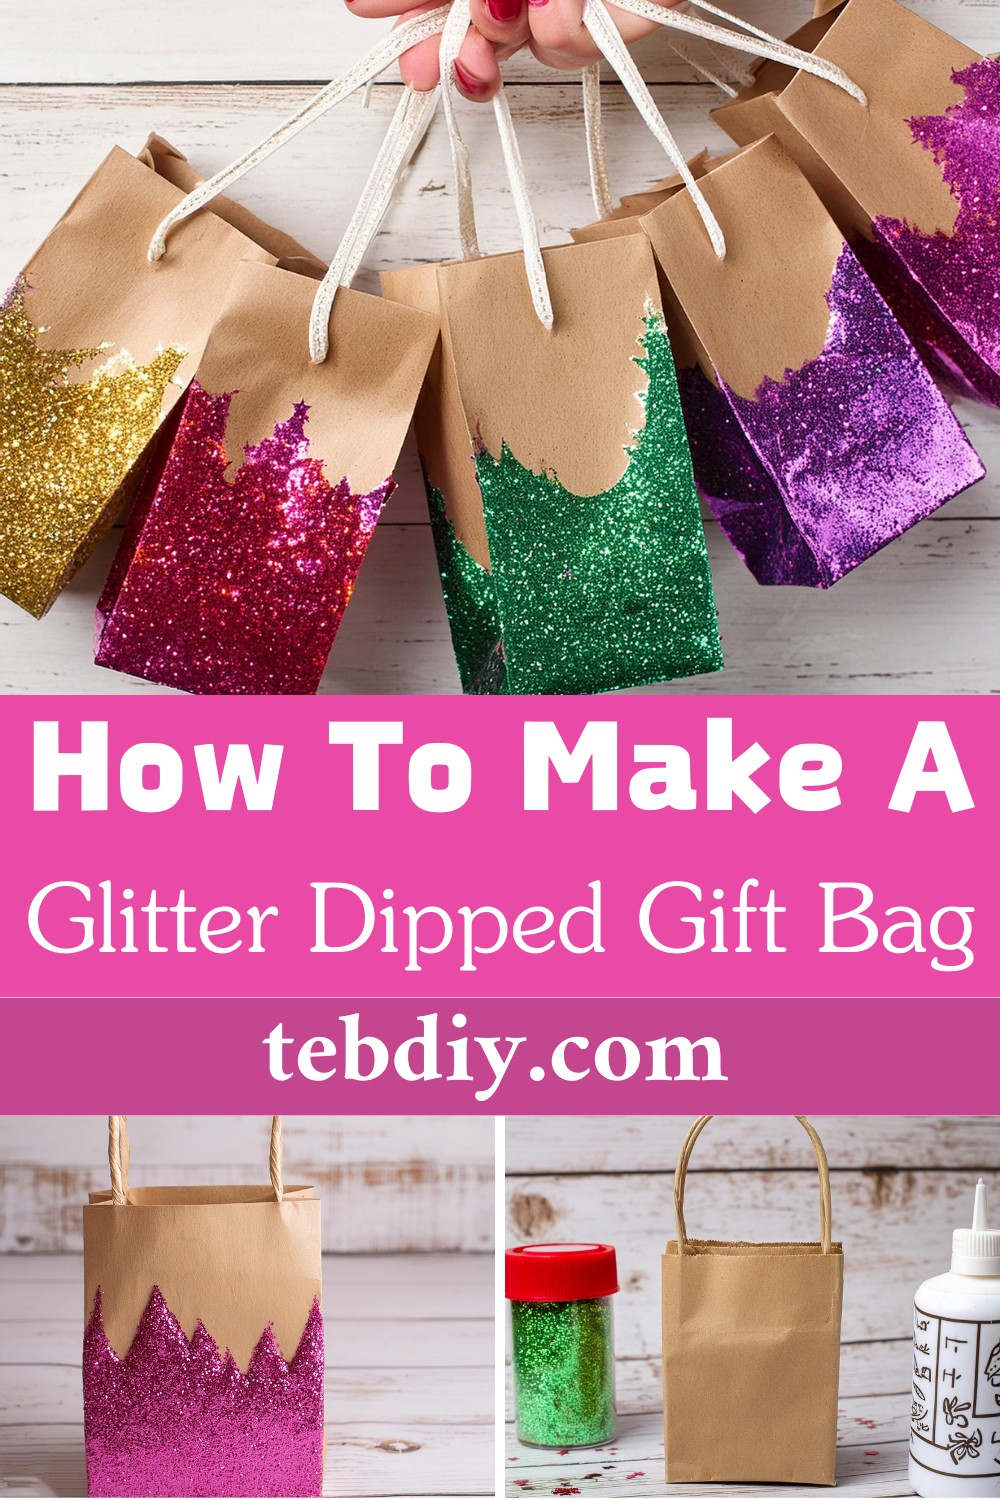 How To Make A Glitter Dipped Gift Bag